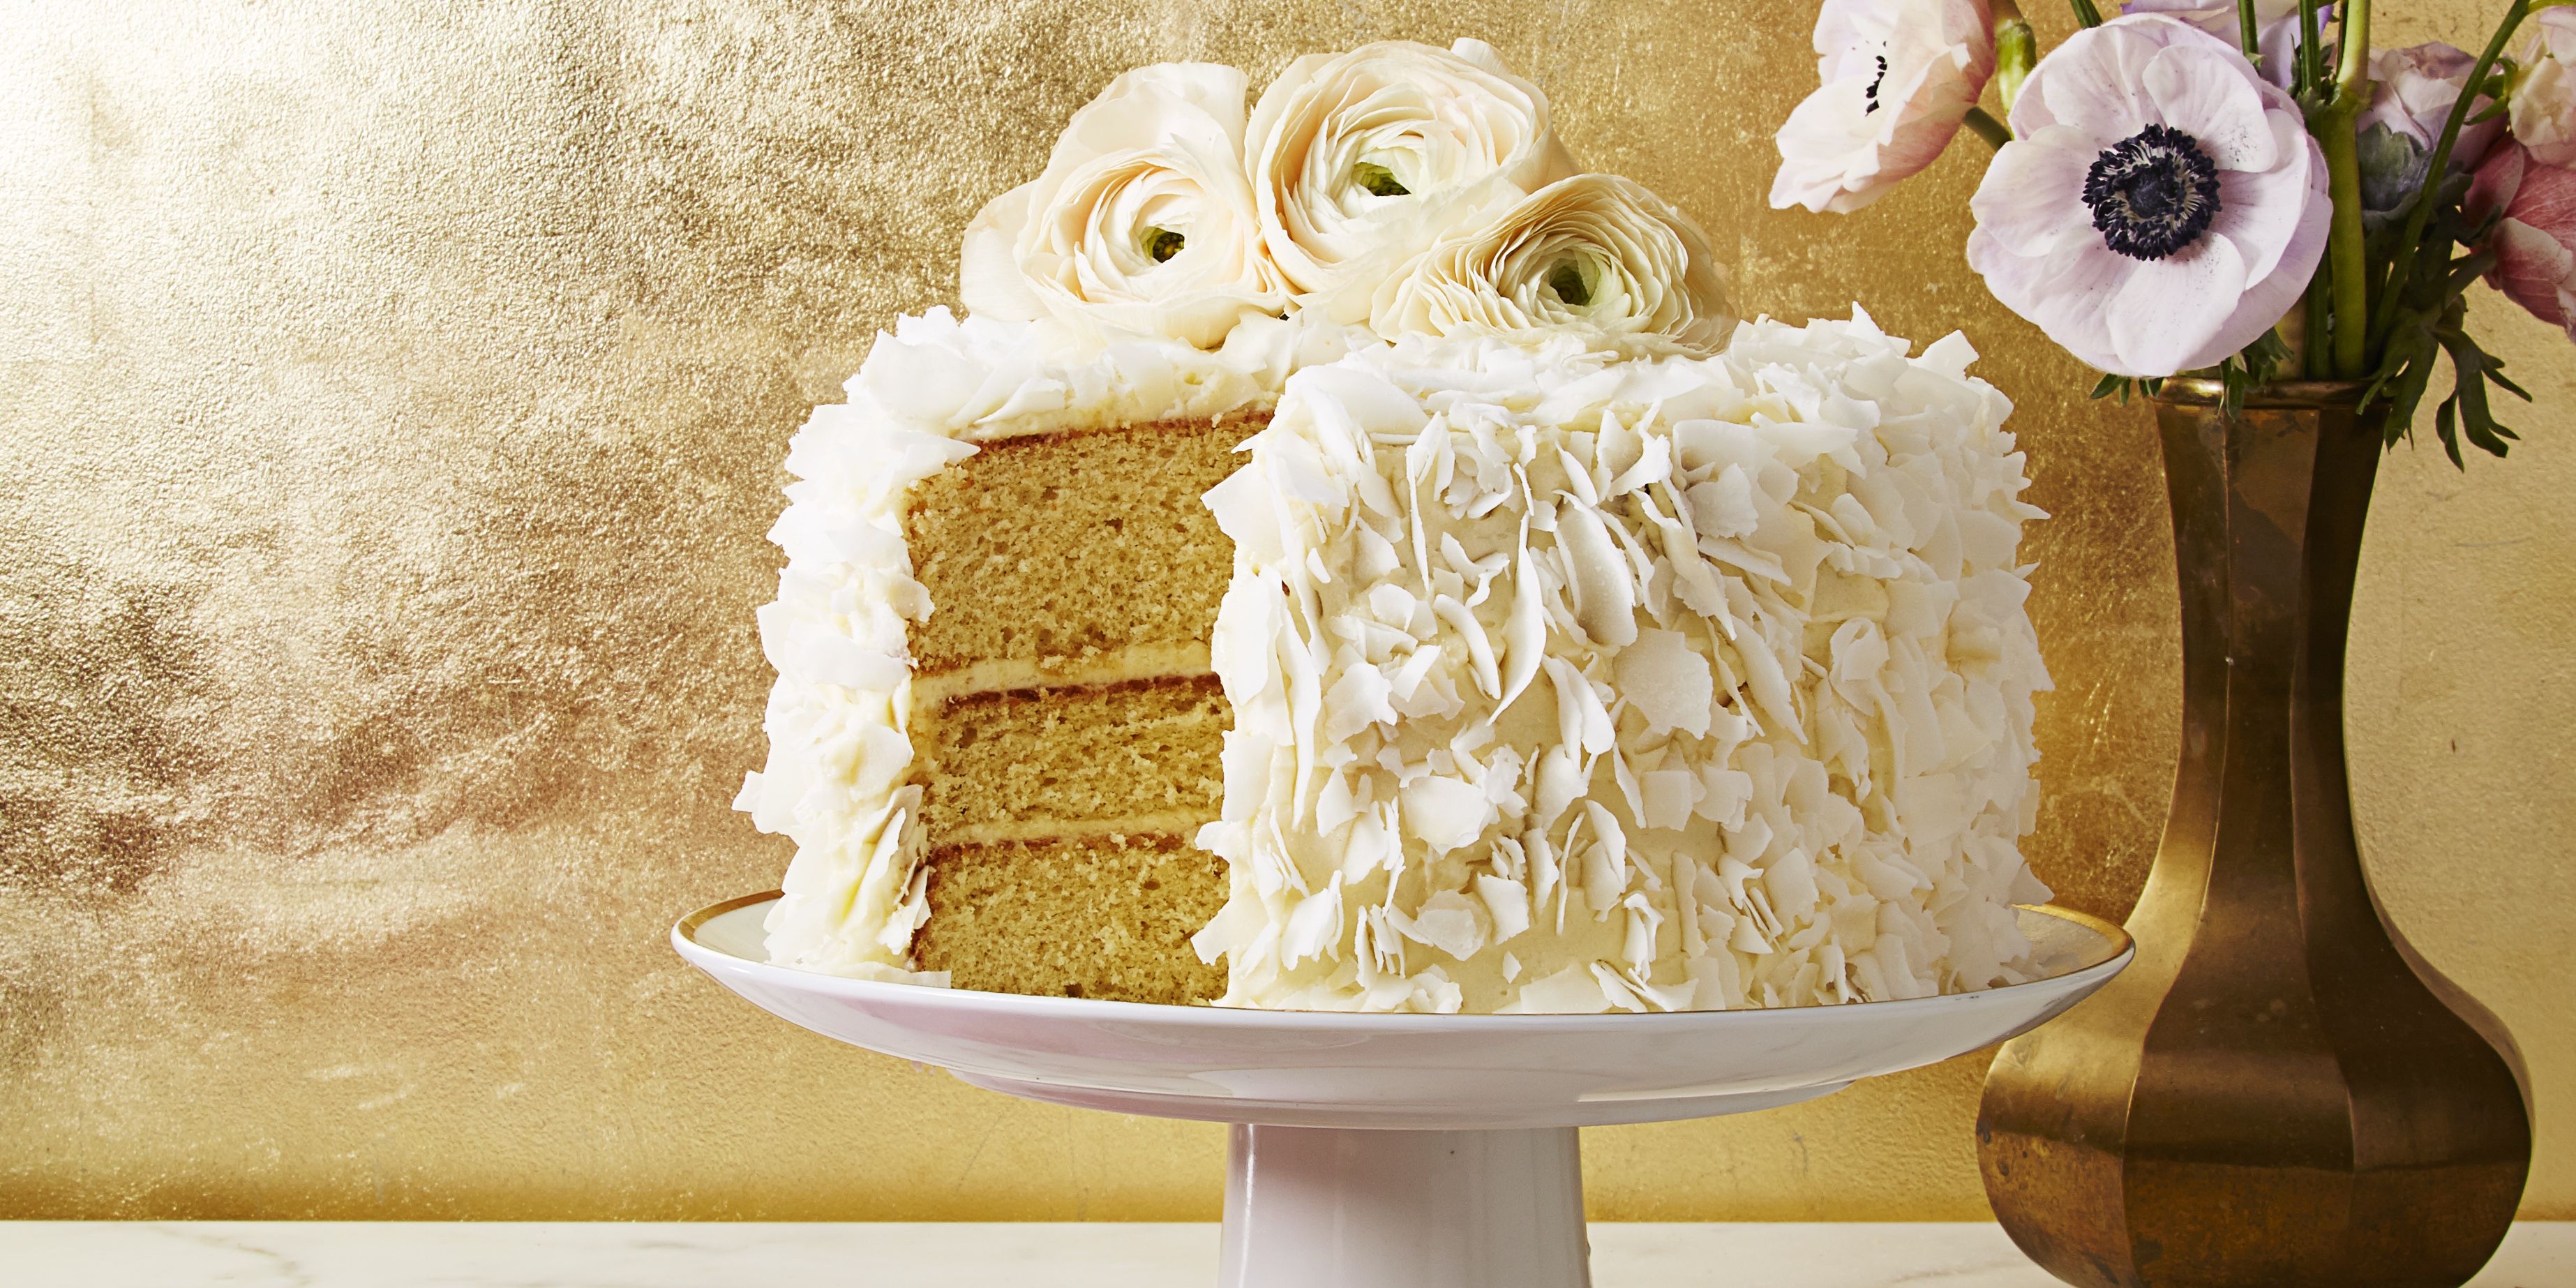 Coconut Cake with Coconut Buttercream Icing | Just A Pinch Recipes